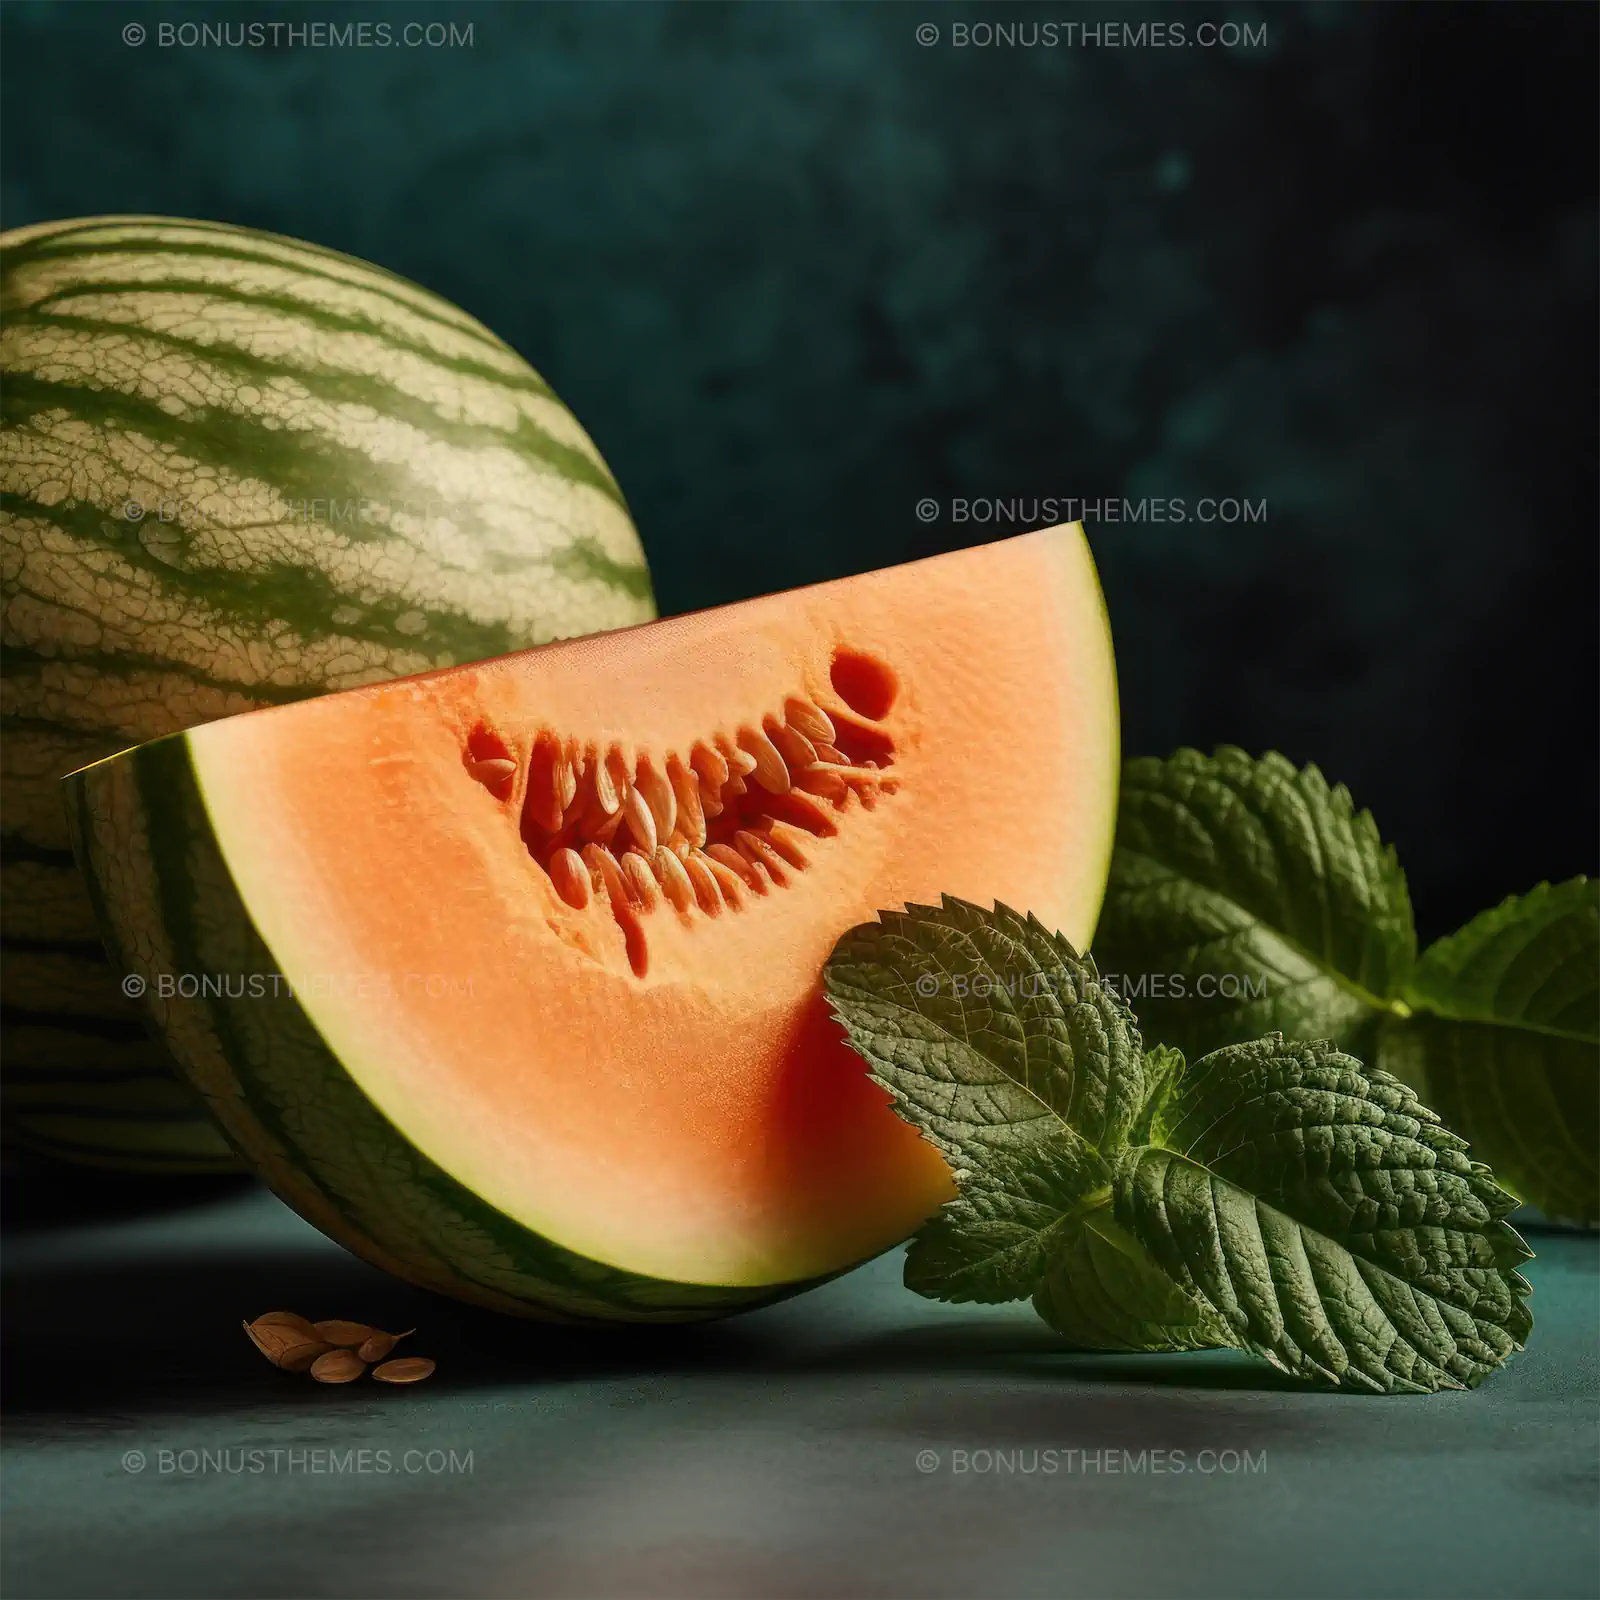 Slice of melon with leaves